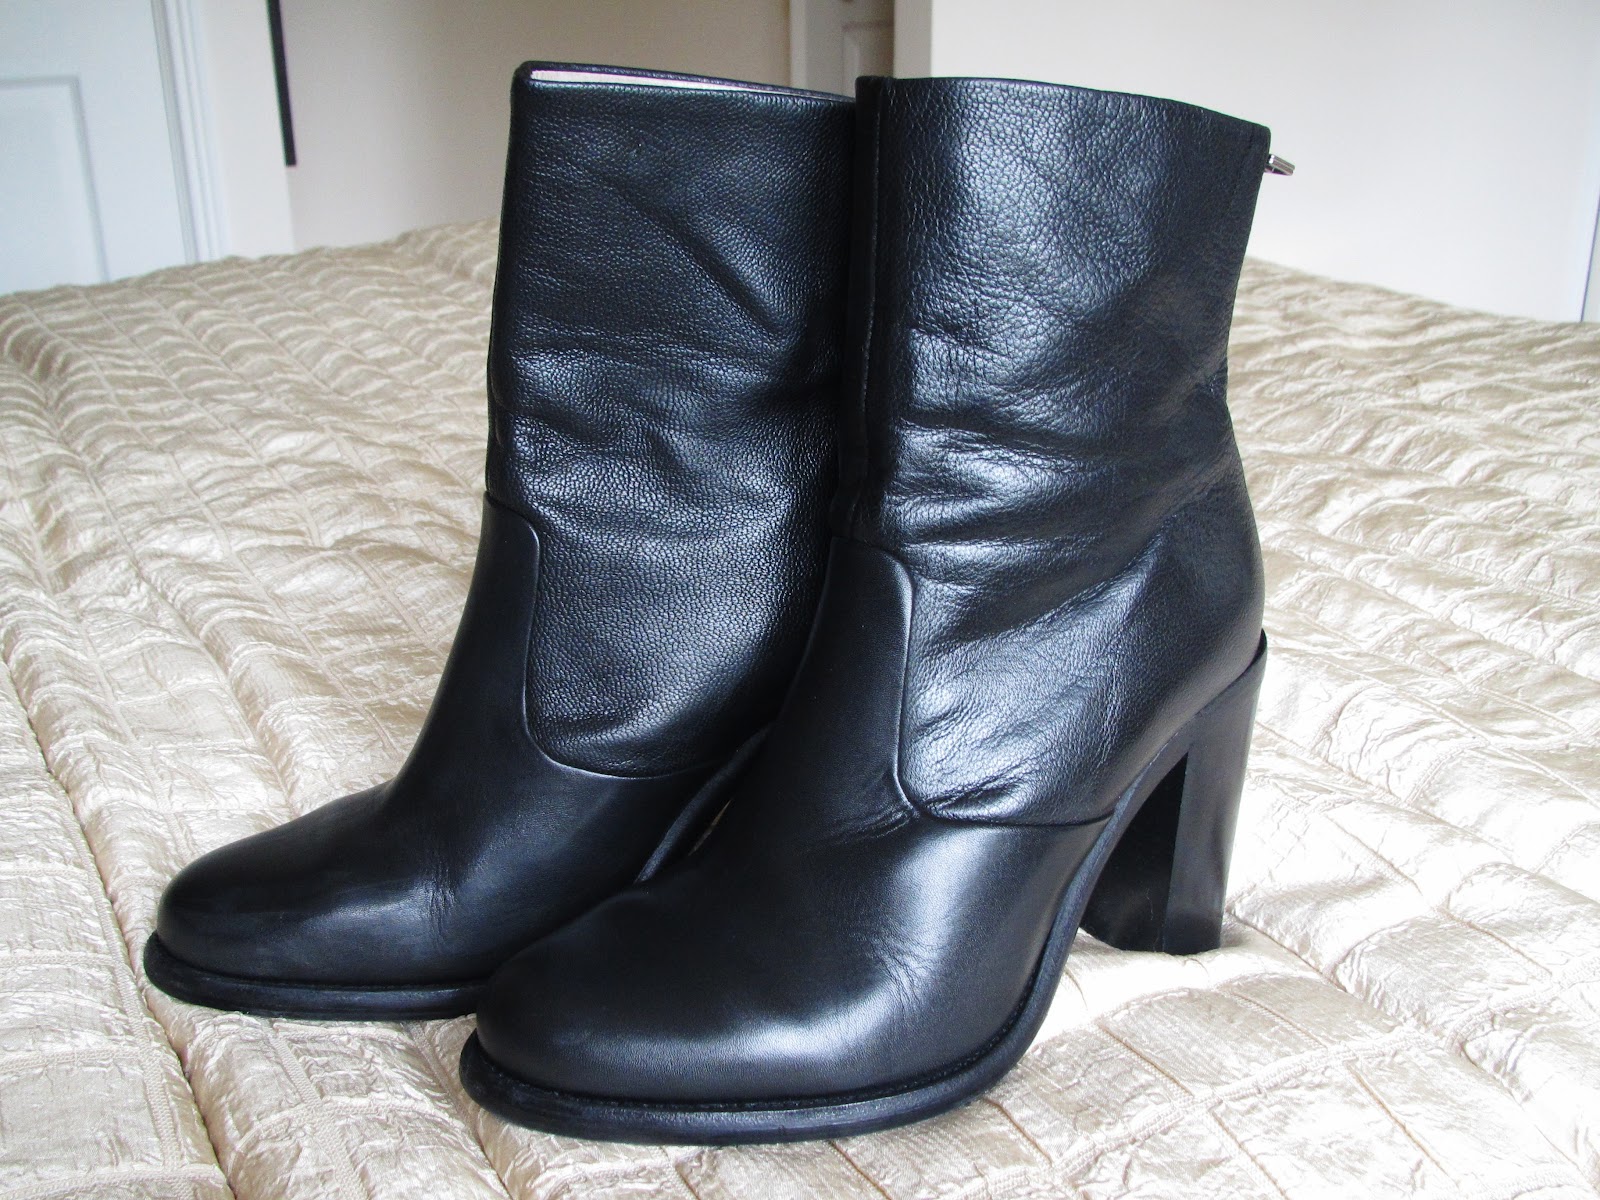 Living off samples: NEW ALL SAINTS BOOTS